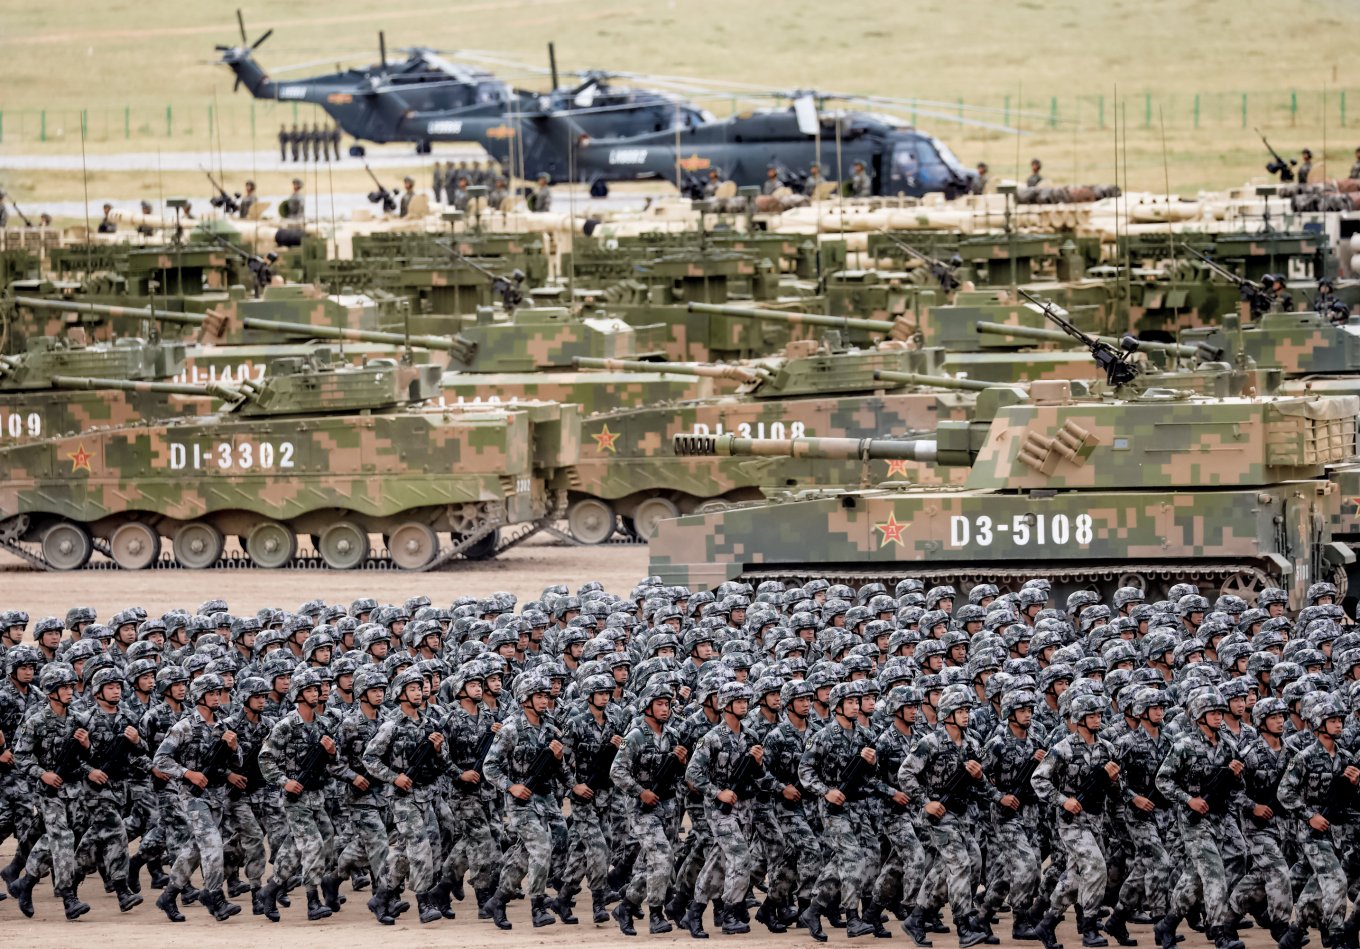 Chinese military equipment / Defense Express / China Supplies russia With Lethal Weapons: Britain and USA Have Evidence